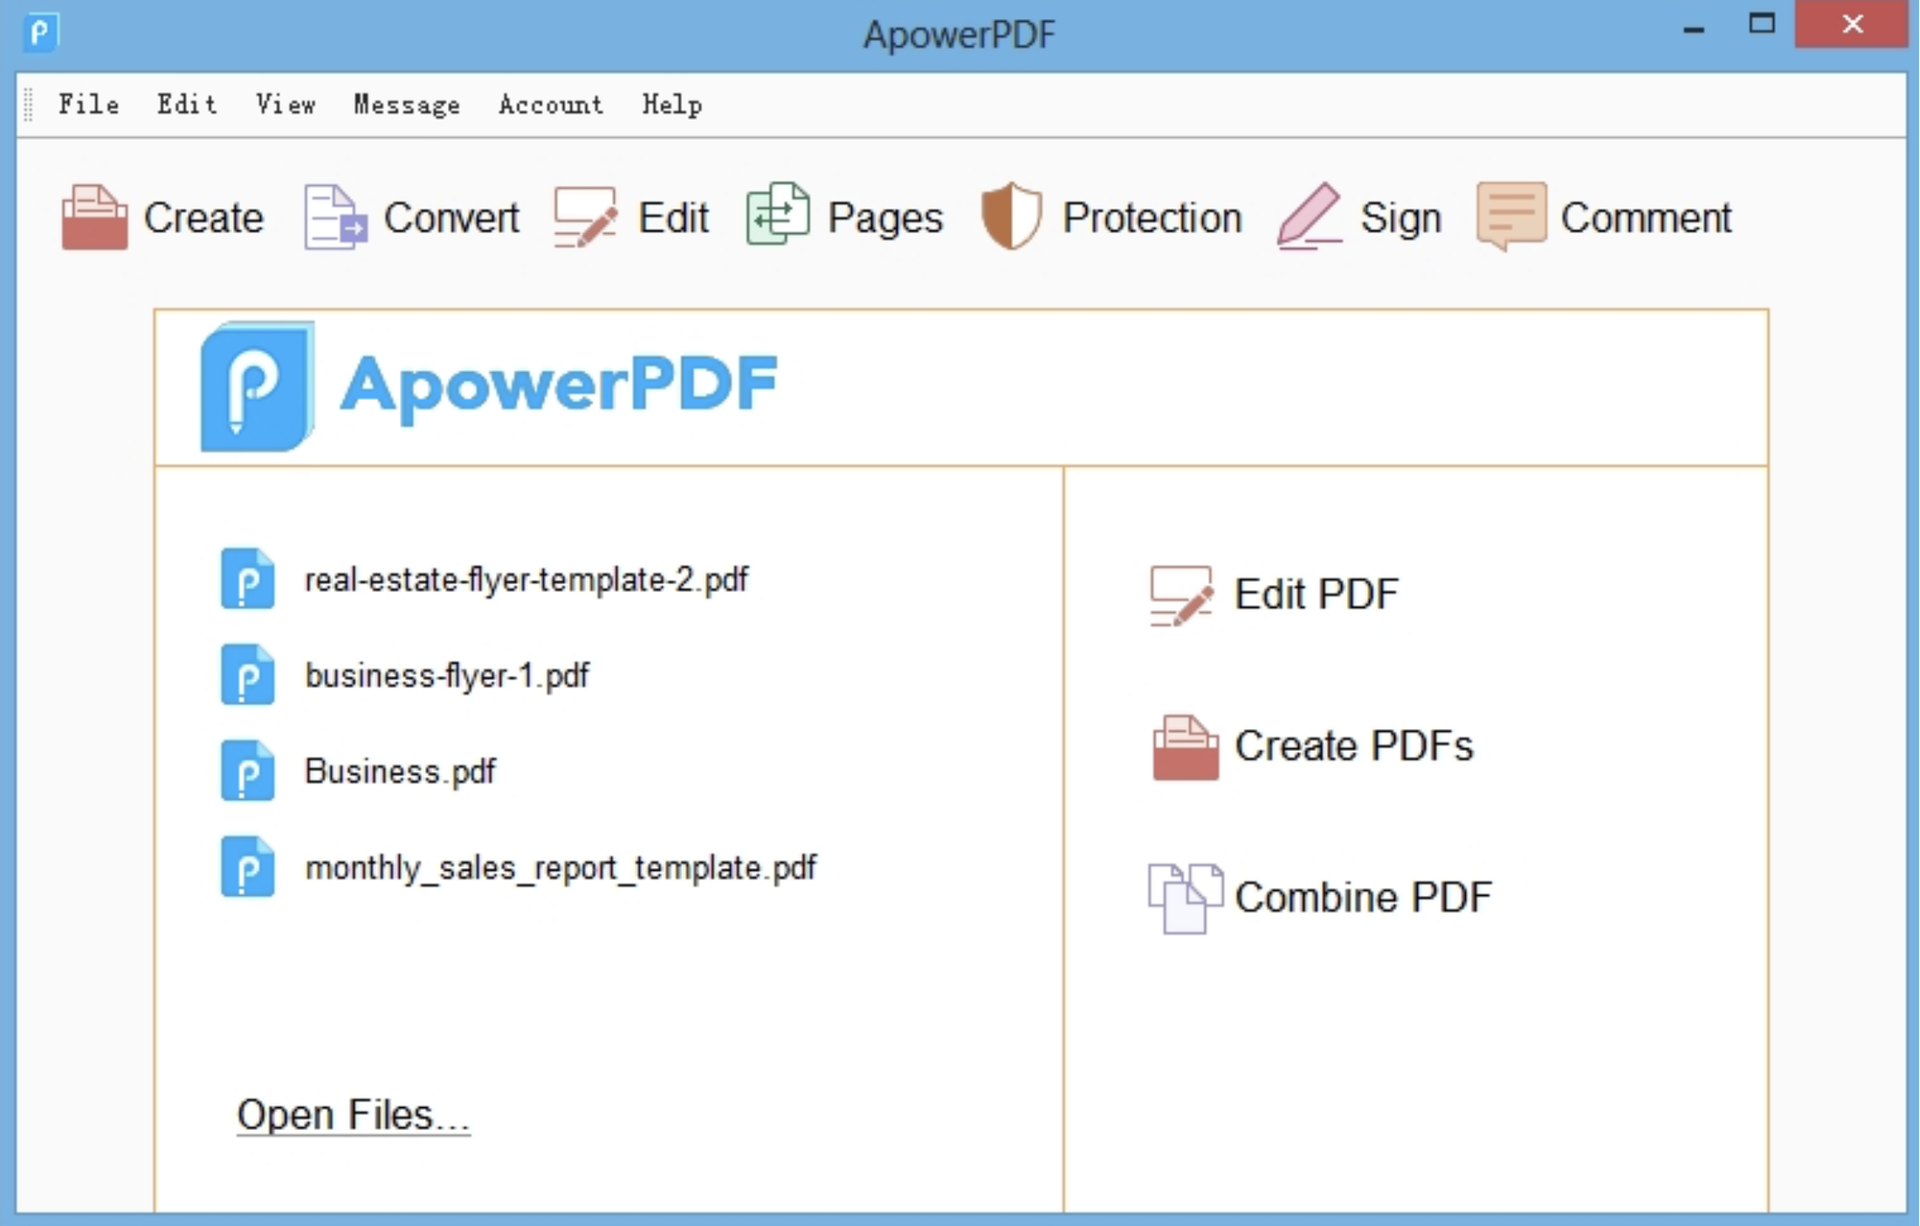 What’s new in ApowerPDF?